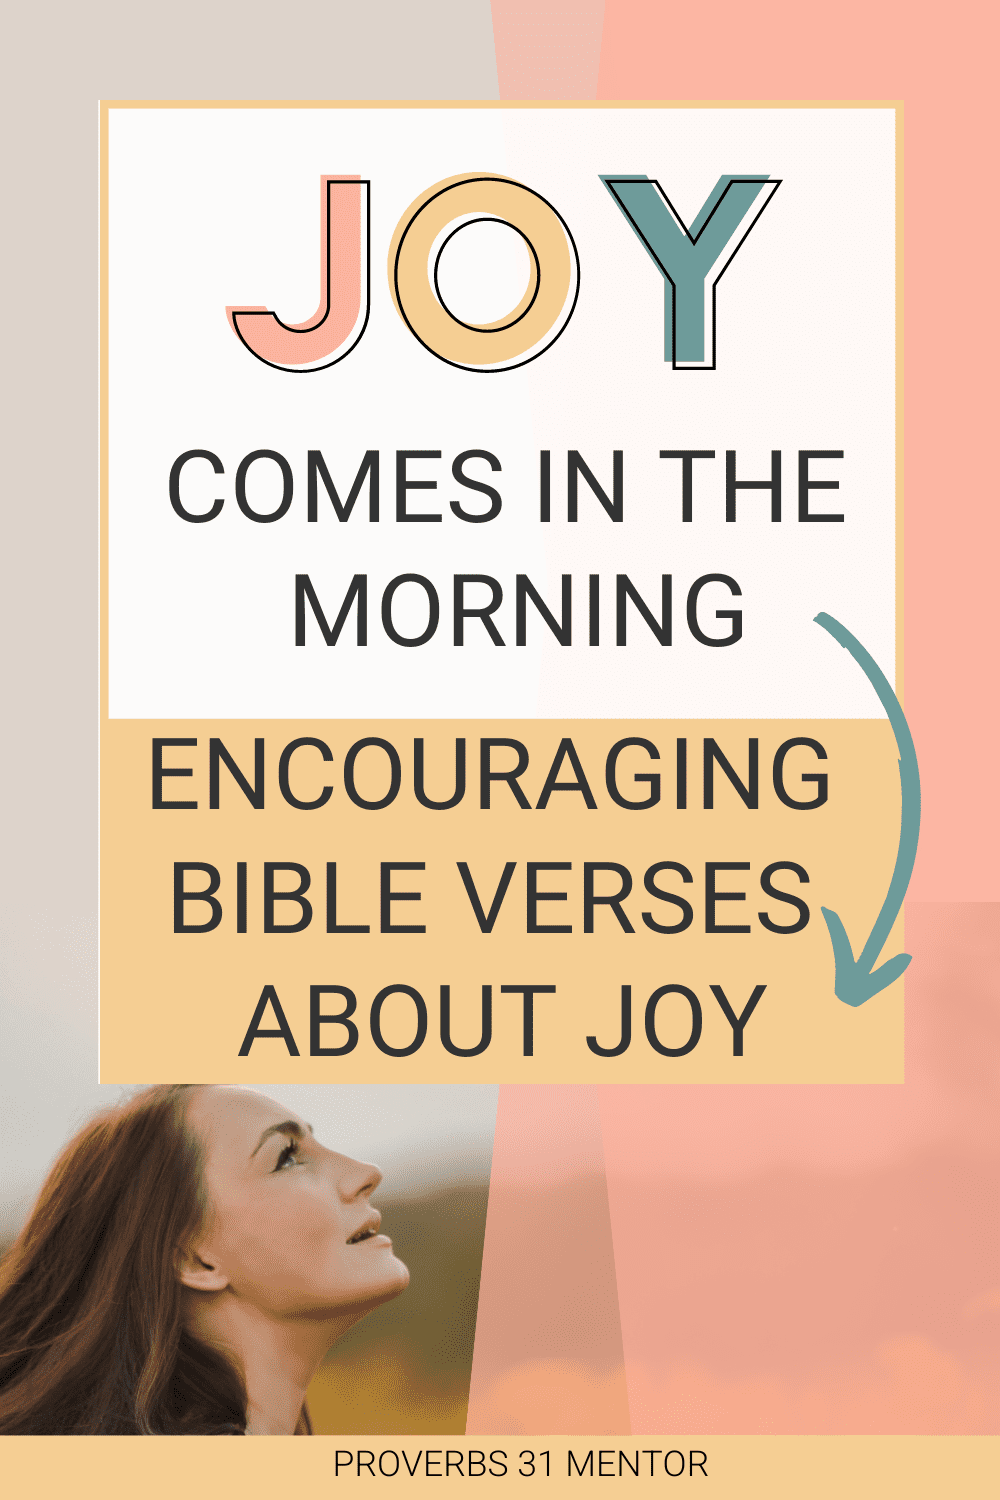 Title: Joy Comes in the Morning: Bible Verses and Psalms on Joy Picture: woman looking at the sky and smiling